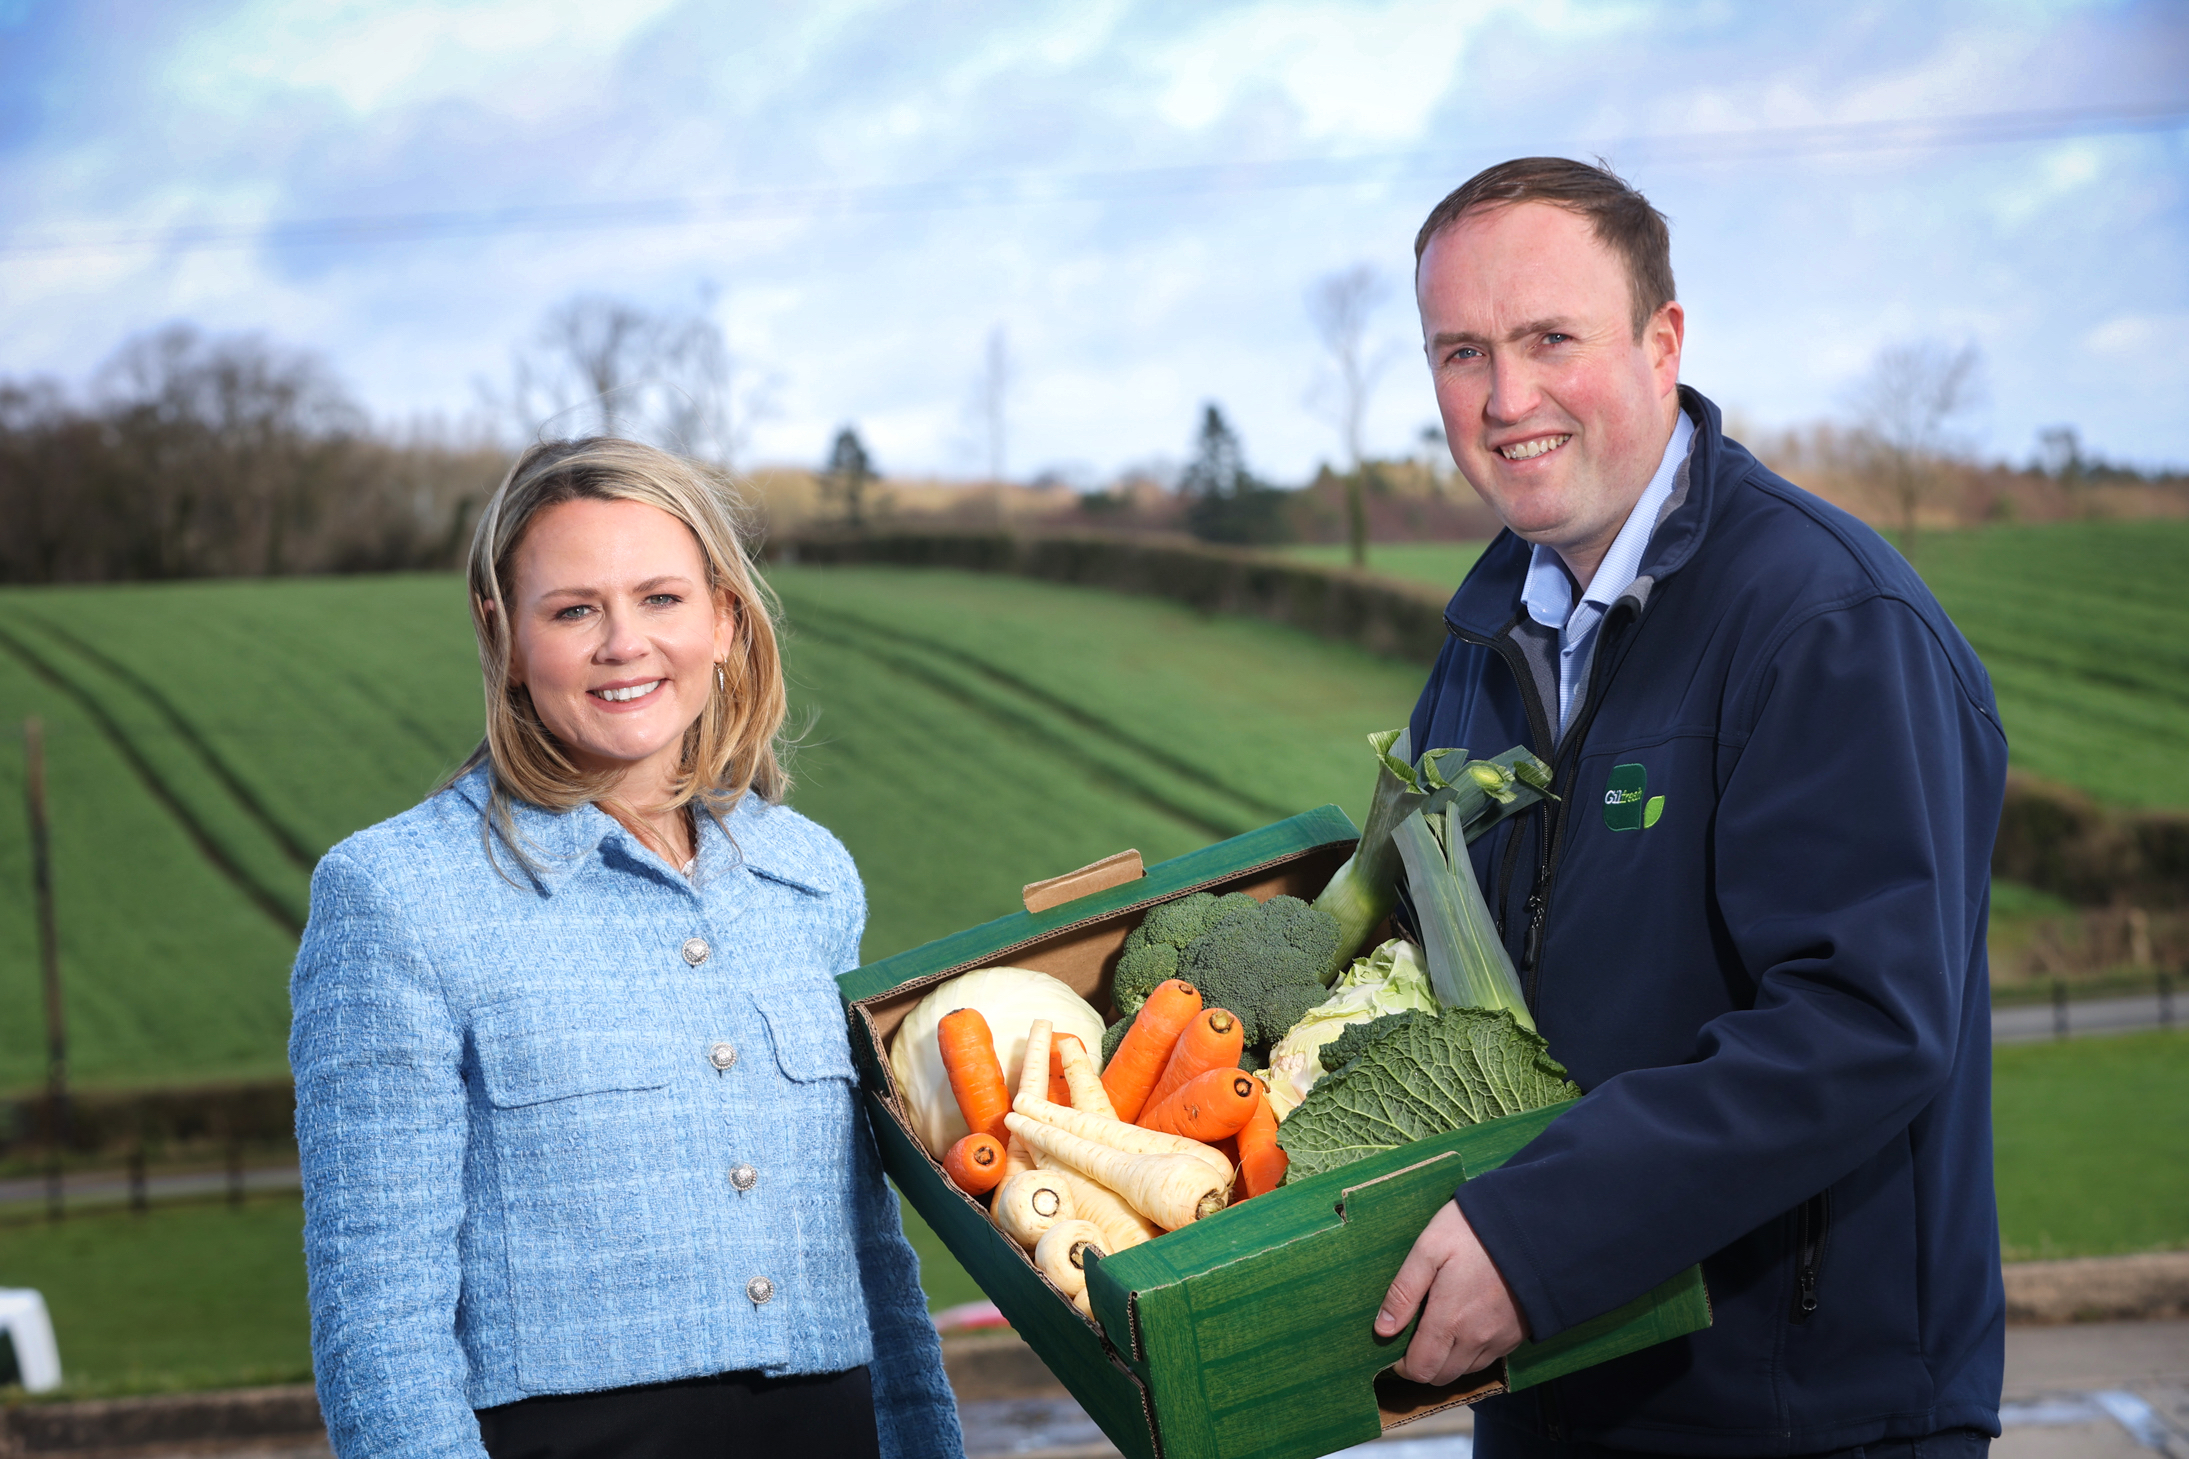 Gilfresh primed for growth after investment in production facilities